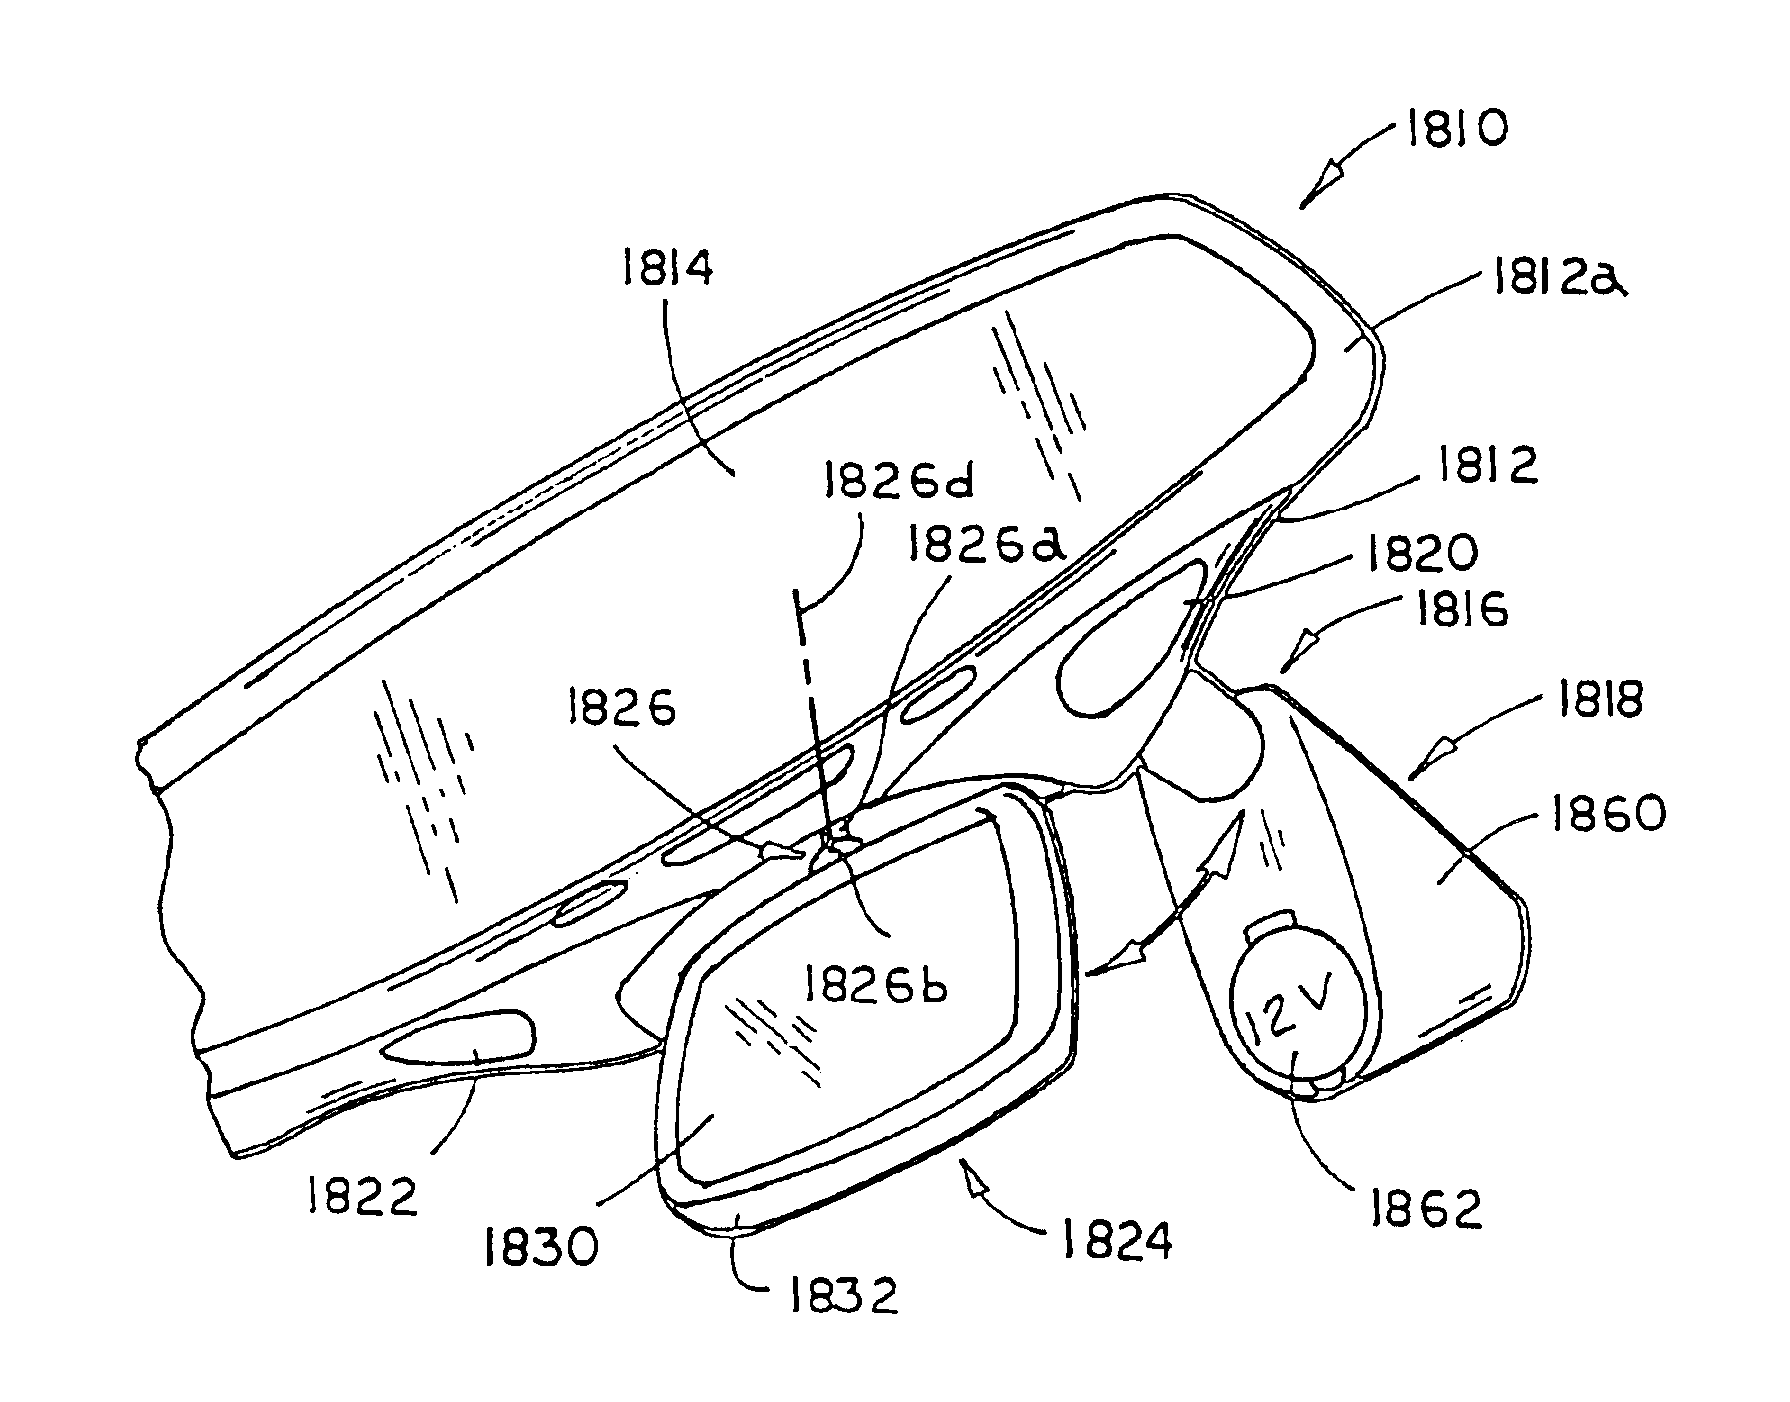 Interior rearview mirror system including a pendent accessory